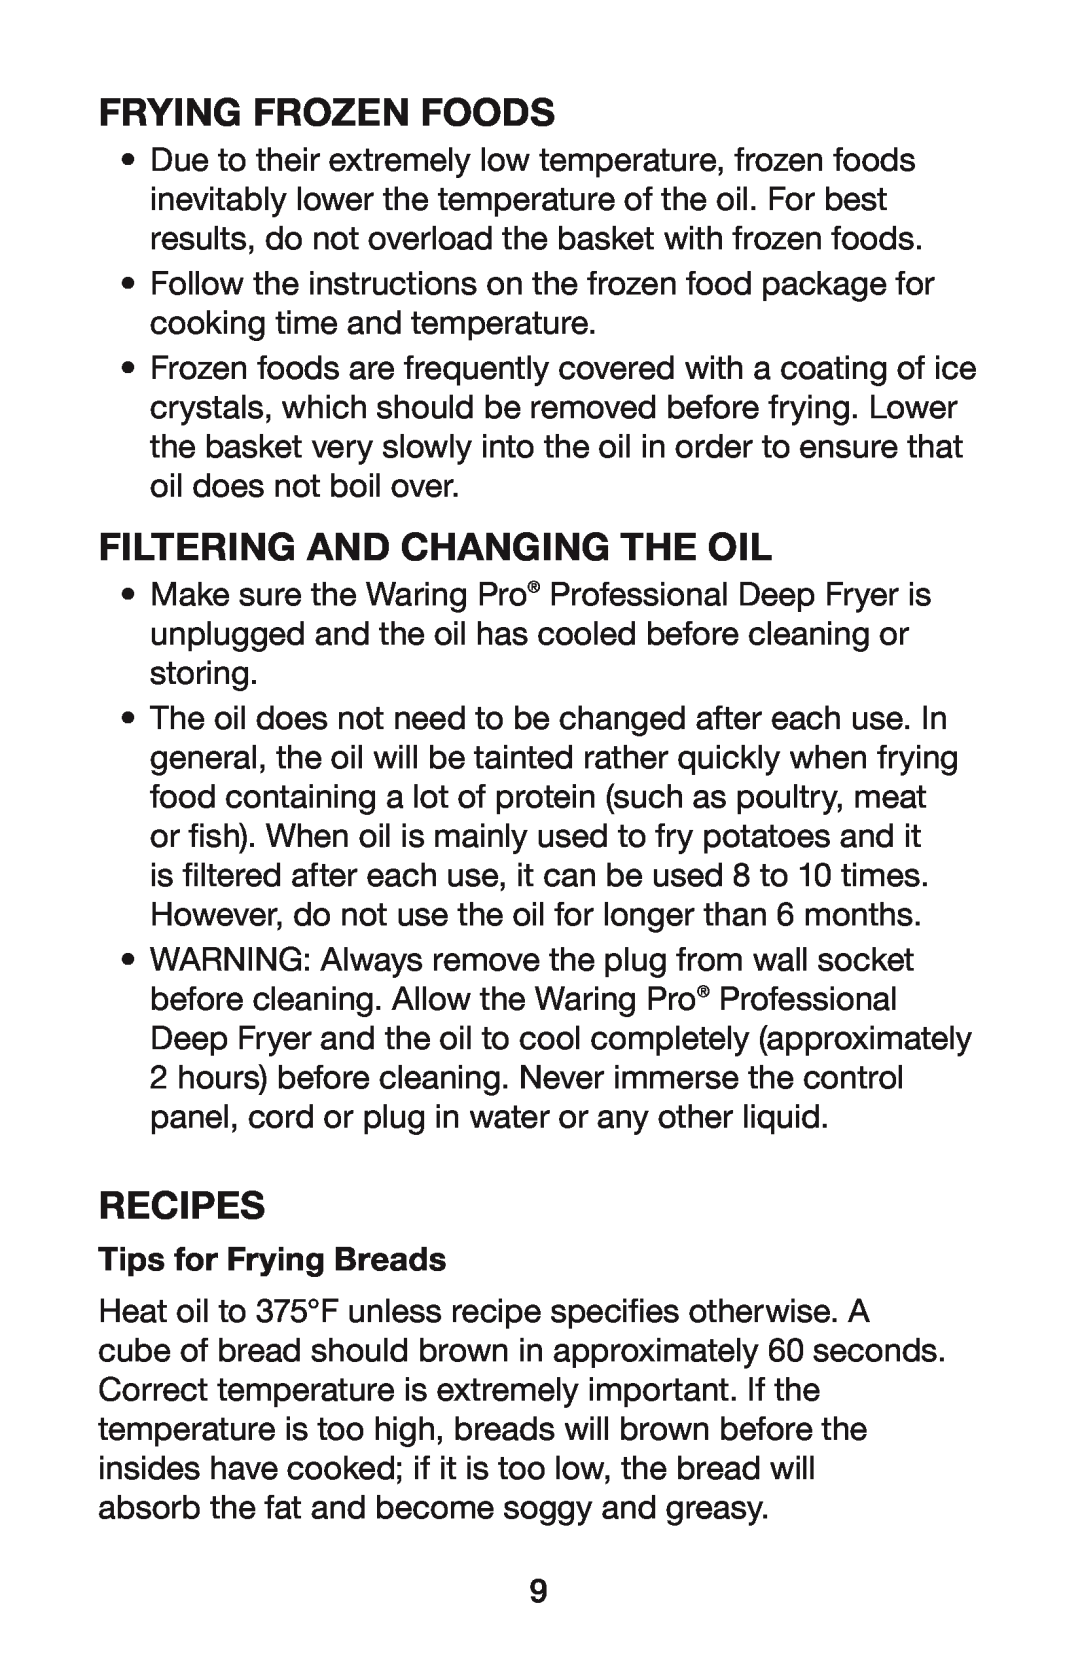 Waring DF280, DF250B manual Frying Frozen Foods, Filtering And Changing The Oil, Recipes, Tips for Frying Breads 